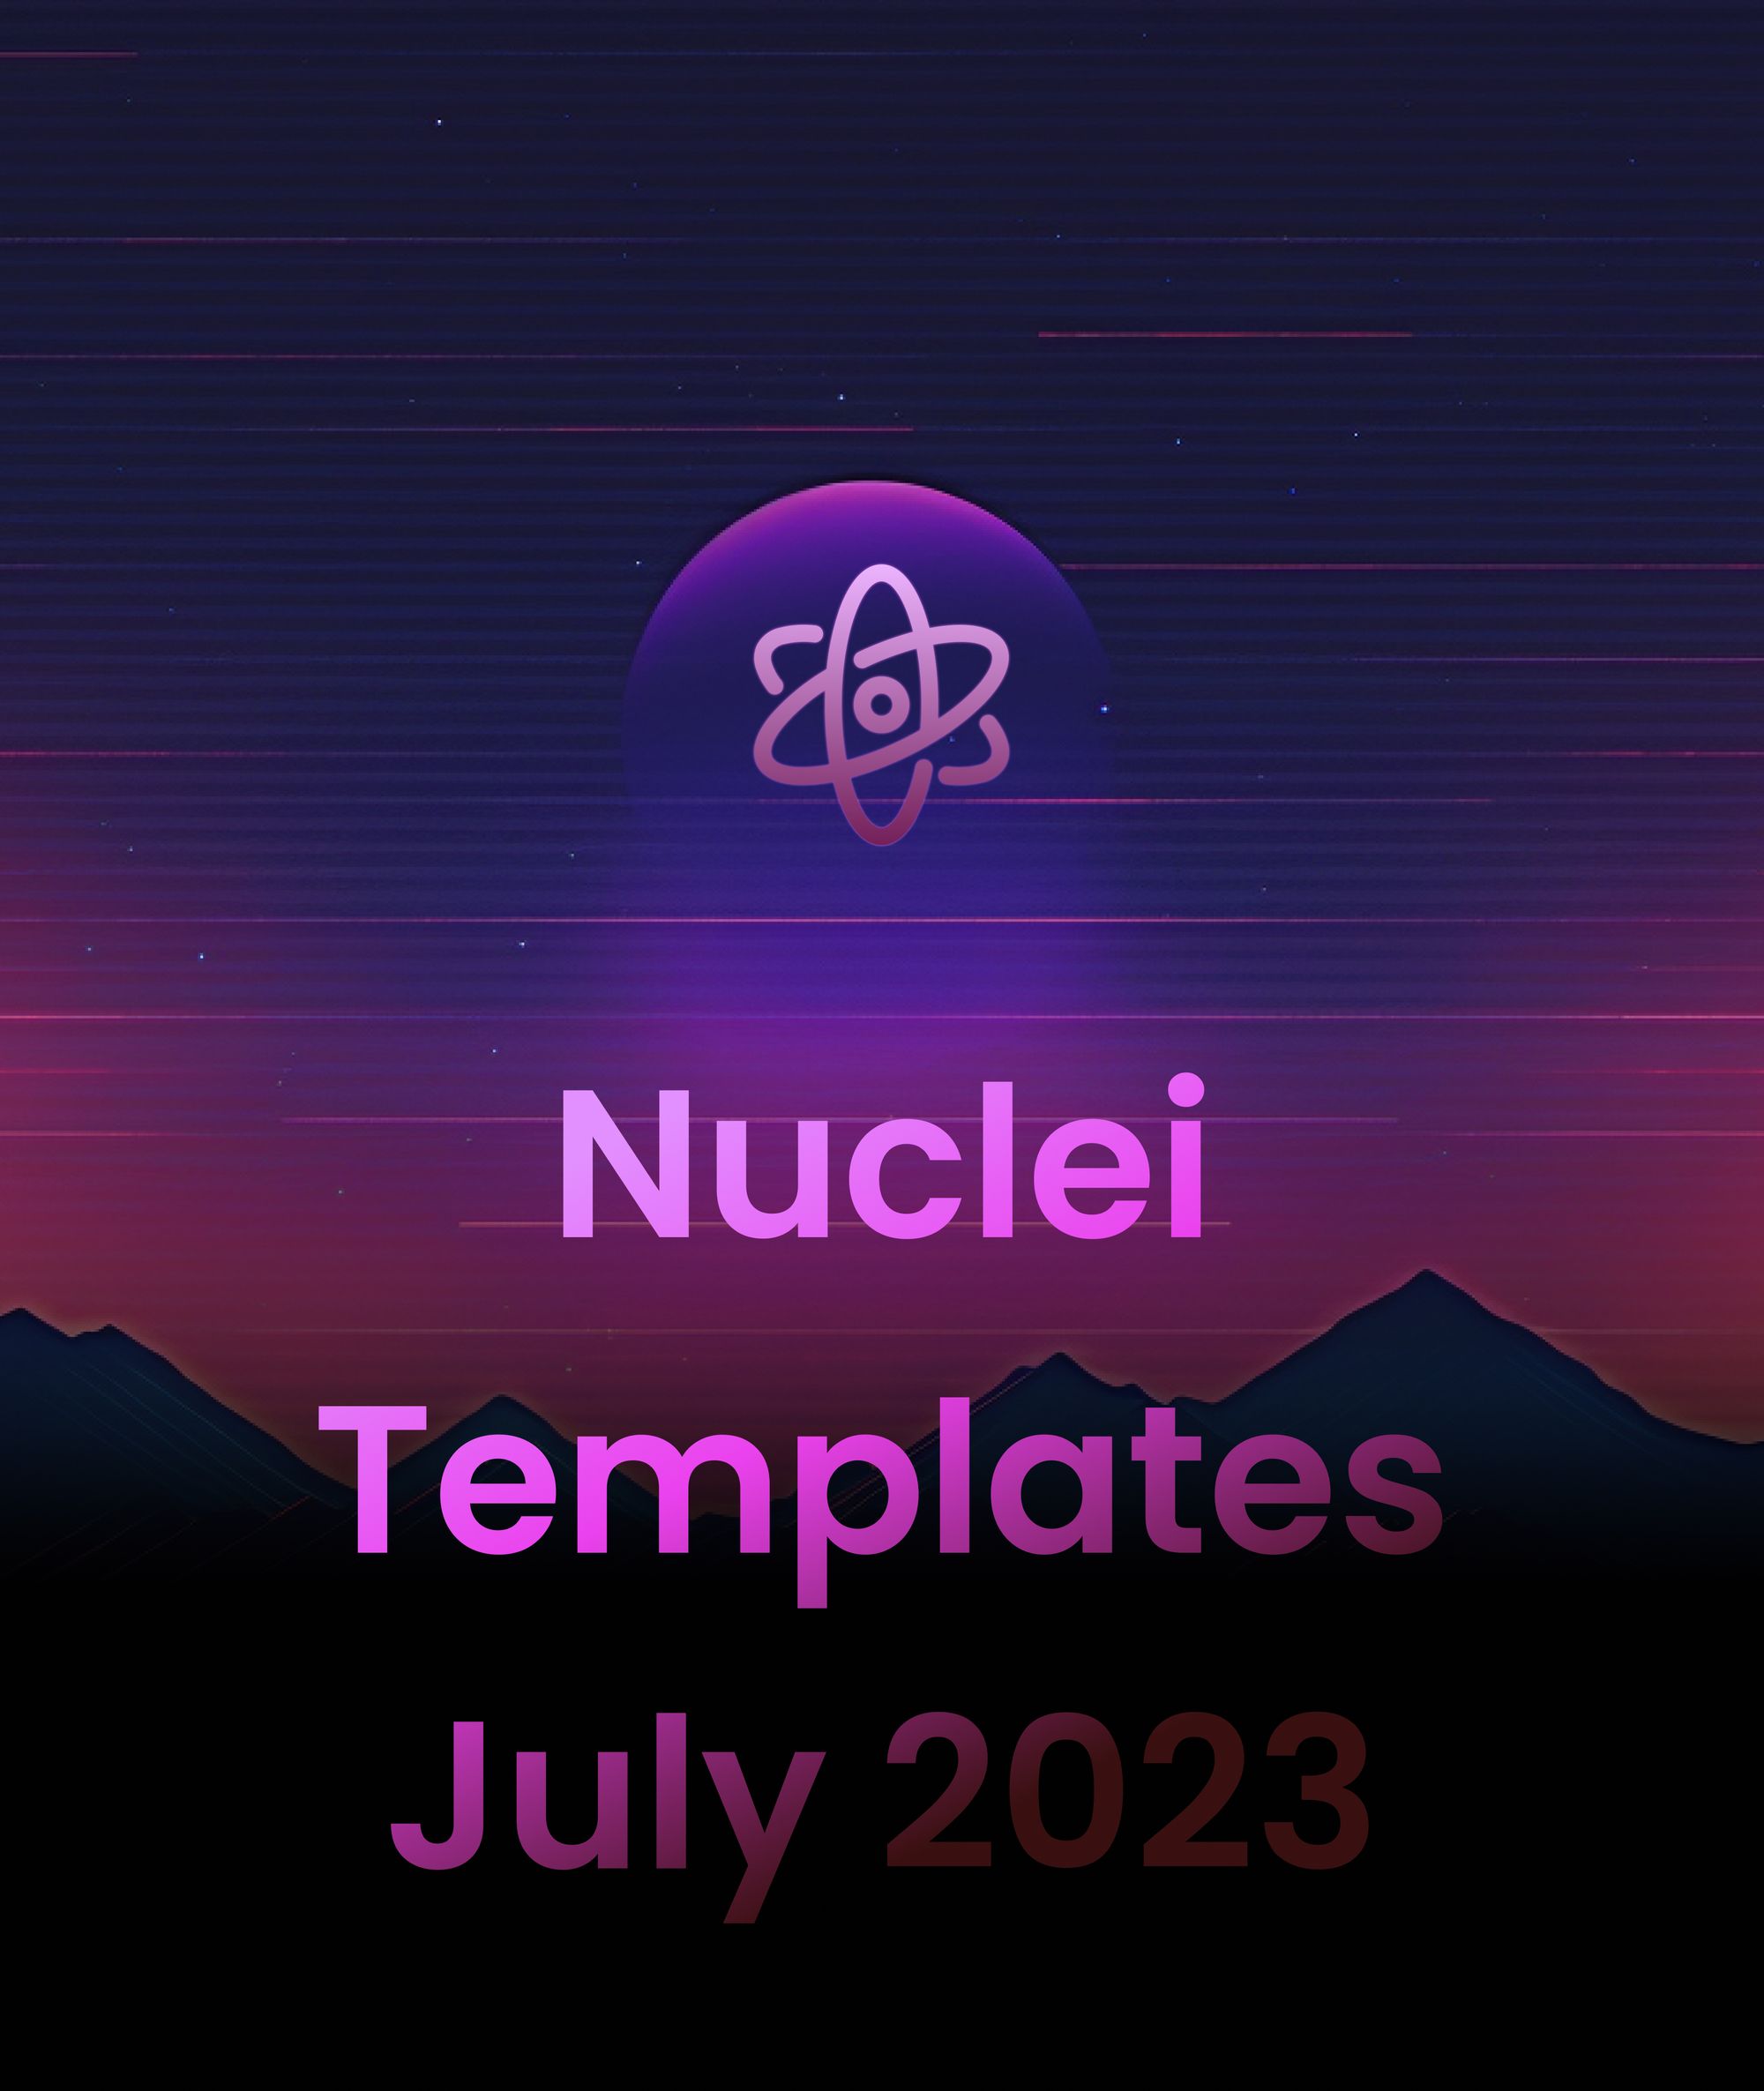 Nuclei Templates Monthly - July 2023 Edition